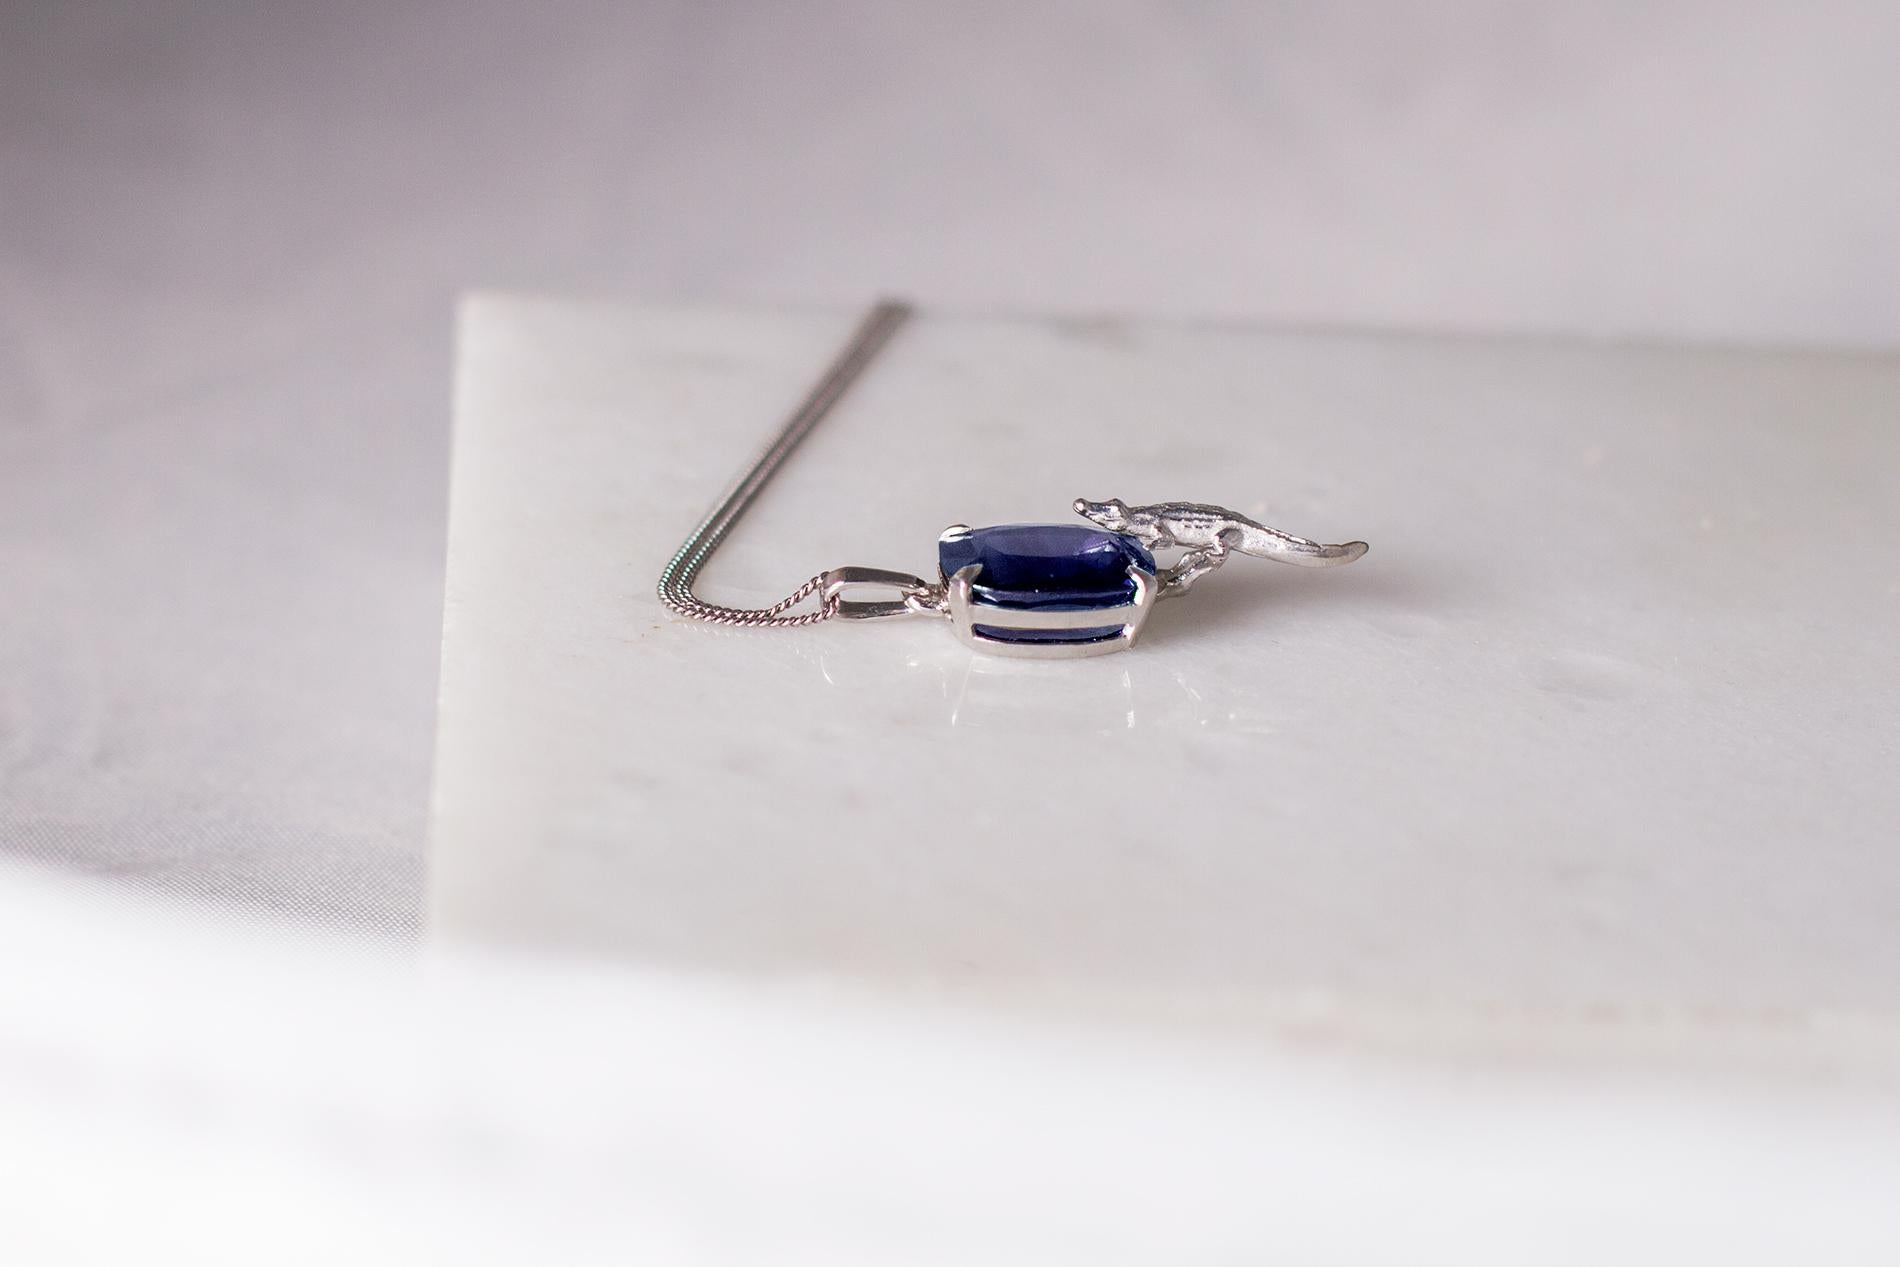 This 18 karat white gold contemporary Mesopotamian pendant necklace is adorned with a stunning natural vivid blue cushion sapphire. The gem is sure to catch the eye and is well-designed in a contemporary pendant necklace.

You can order this piece